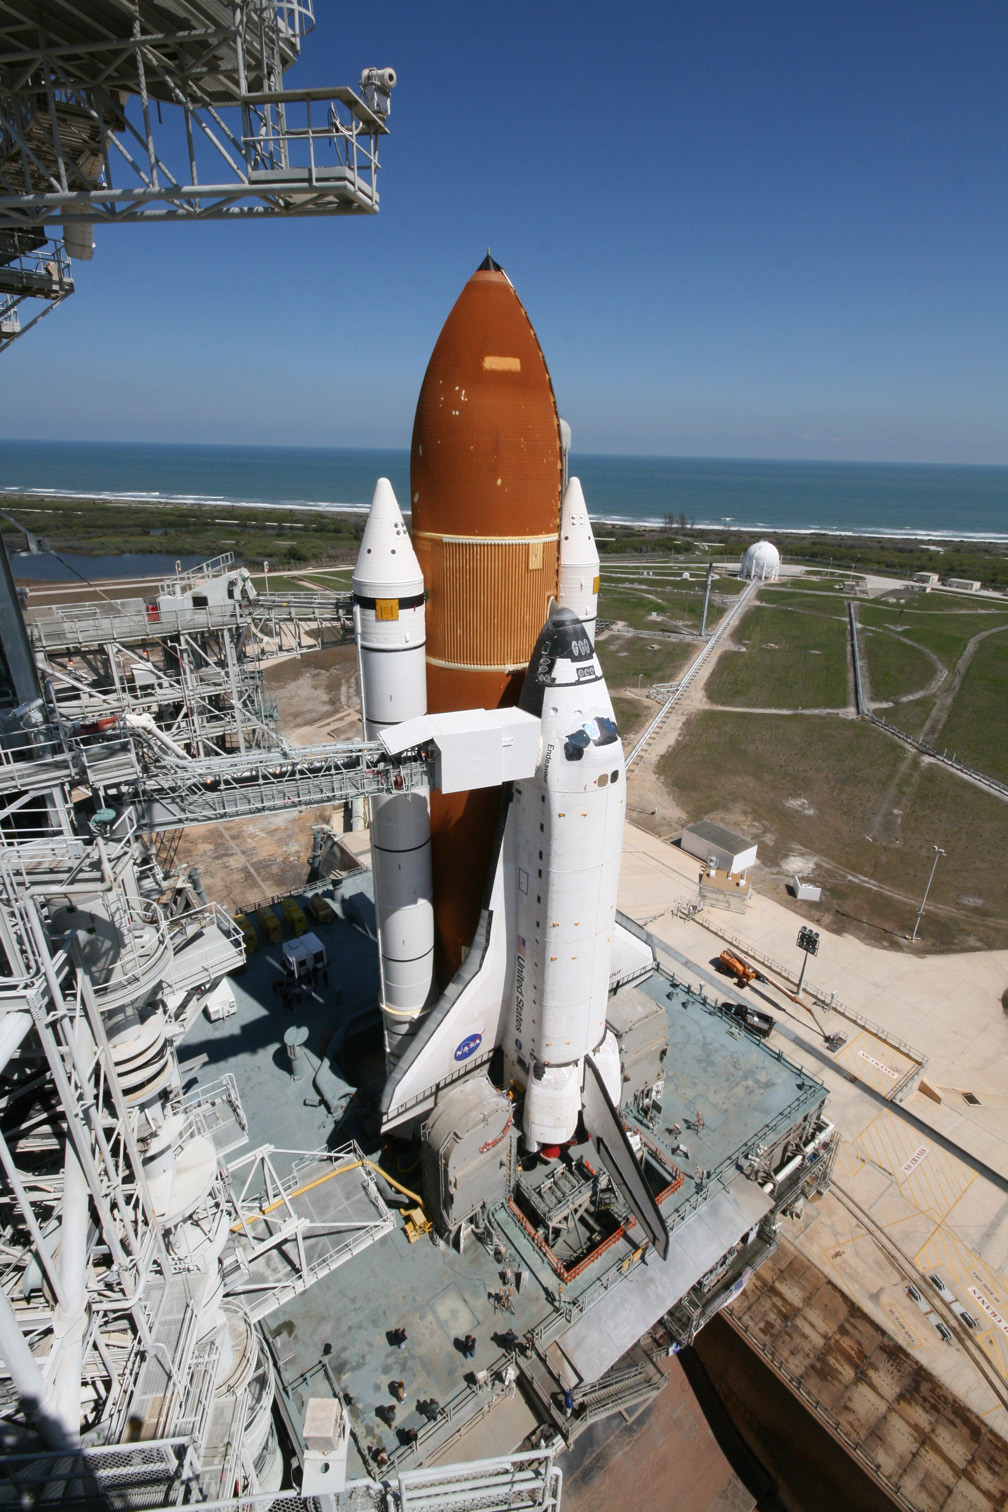 Space Shuttle Endeavour Cape Canaveral Launch Us Wallpapers